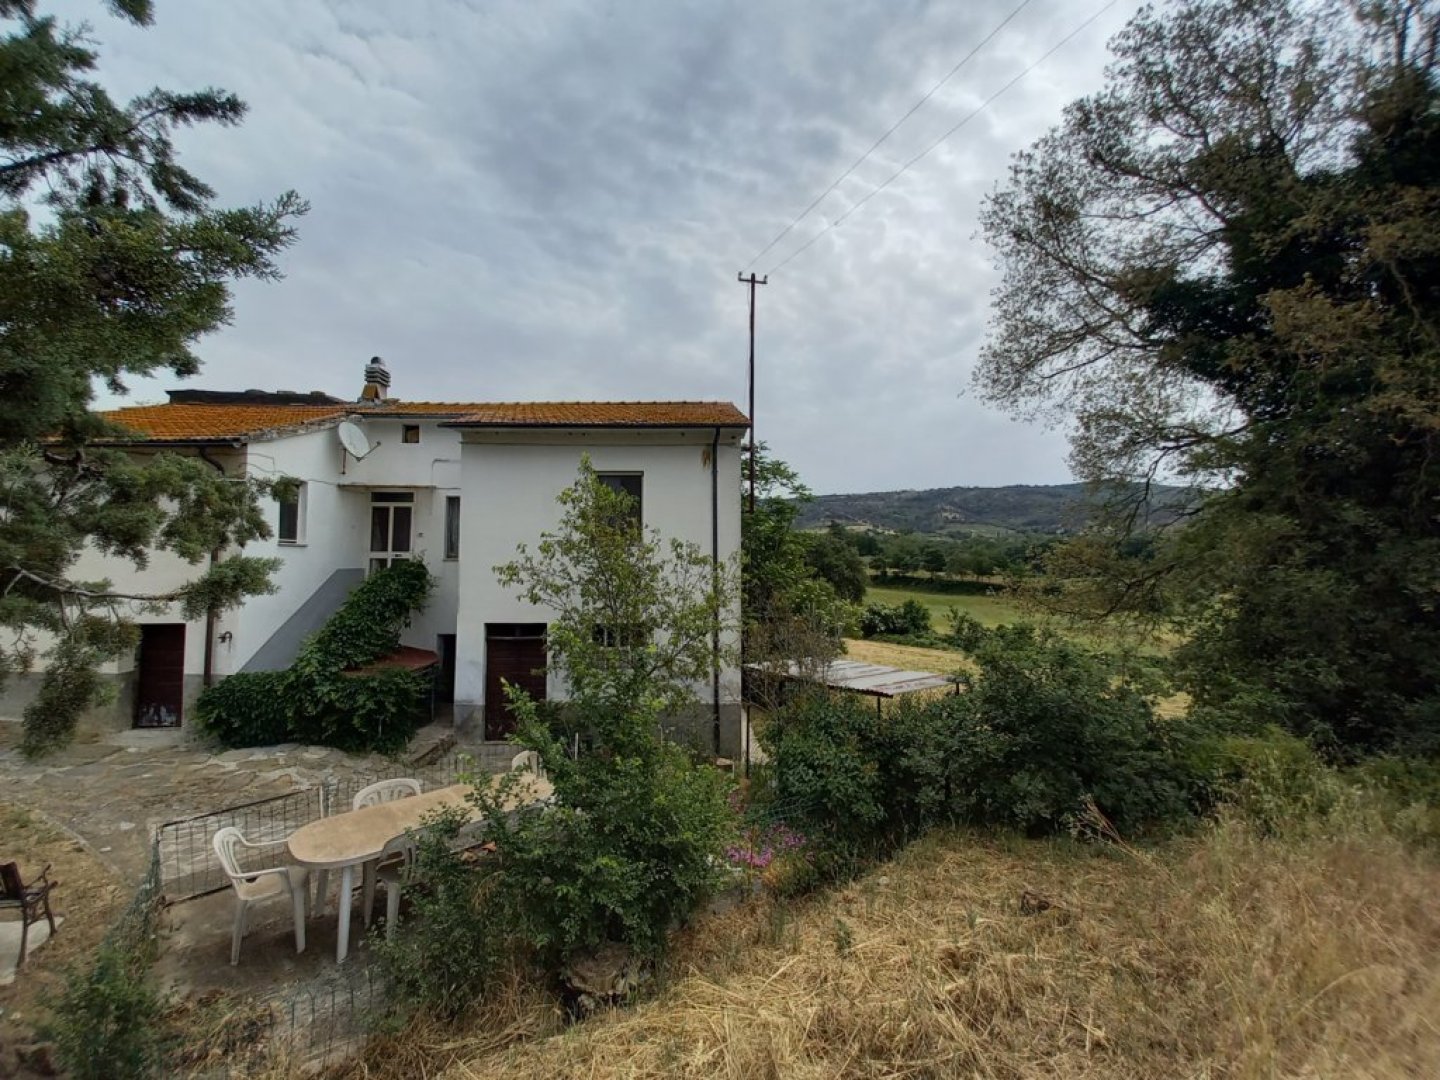 Detached house in the open countrysideg_20220617081719 ium36909-g_20220617081719.